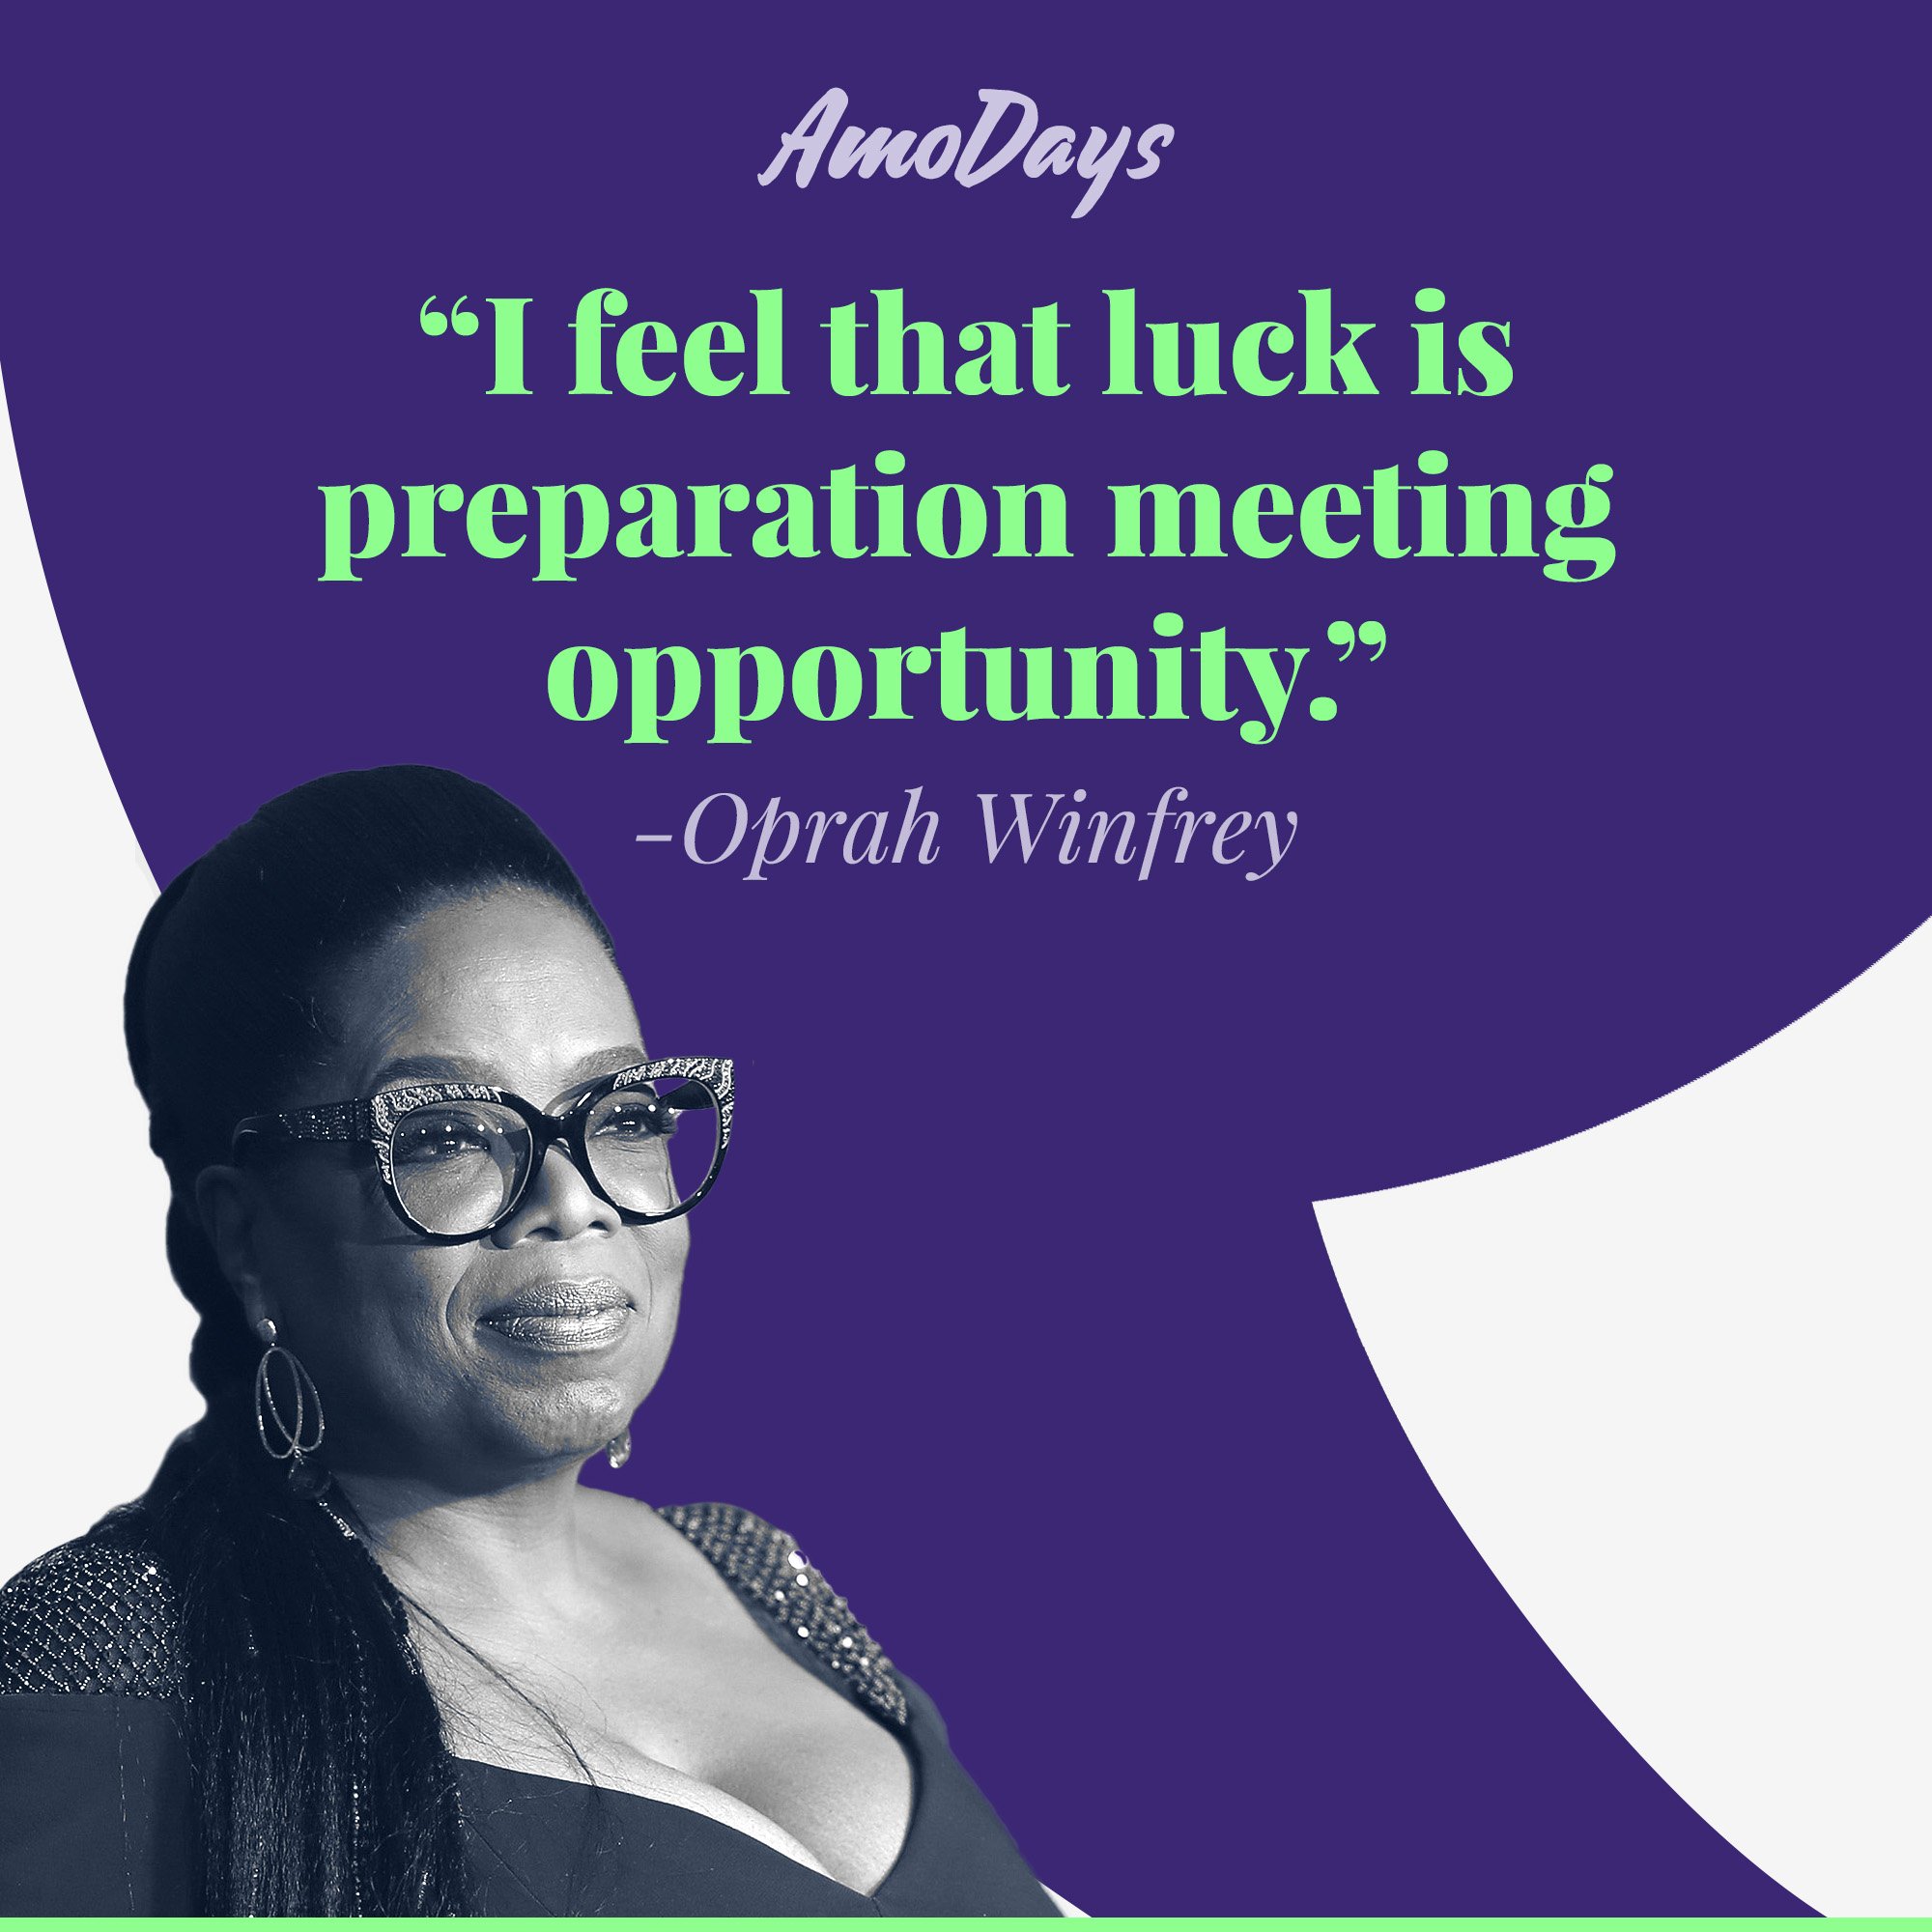 Oprah Winfrey's quote: "I feel that luck is preparation meeting opportunity." | Image: AmoDays